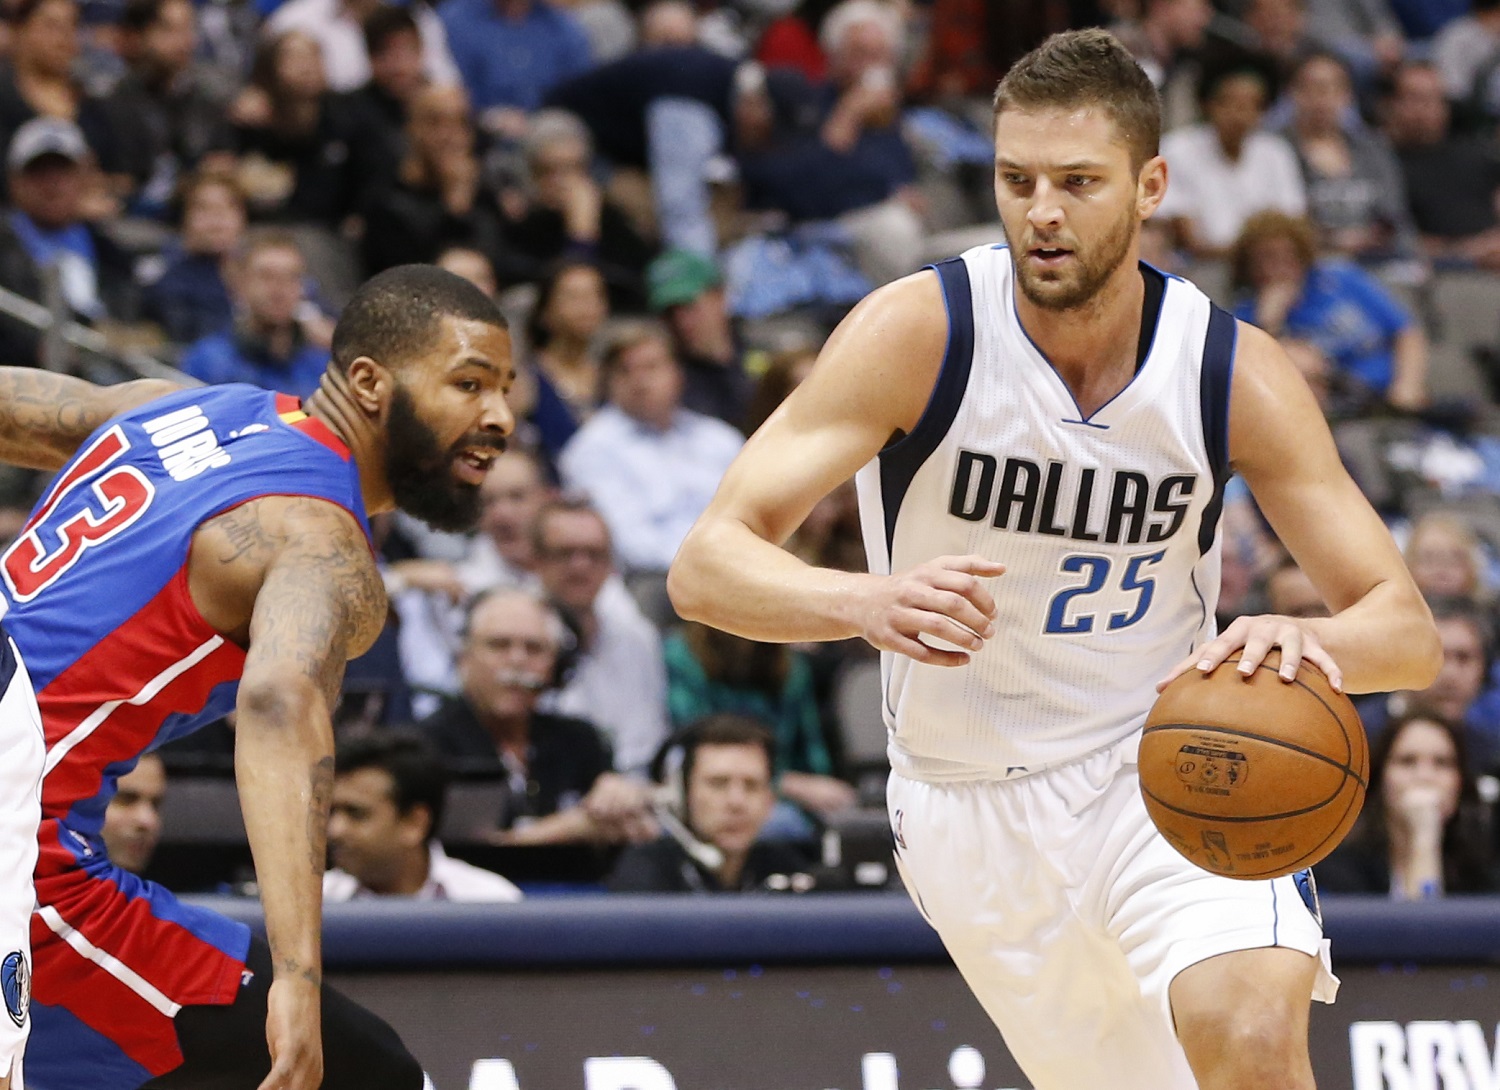 Dallas Mavericks forward Chandler Parsons (25) drives around Detroit Pistons forward Marcus Morris (13) during the first half of an NBA basketball game, Wednesday, March 9, 2016, in Dallas. (AP Photo/Jim Cowsert)